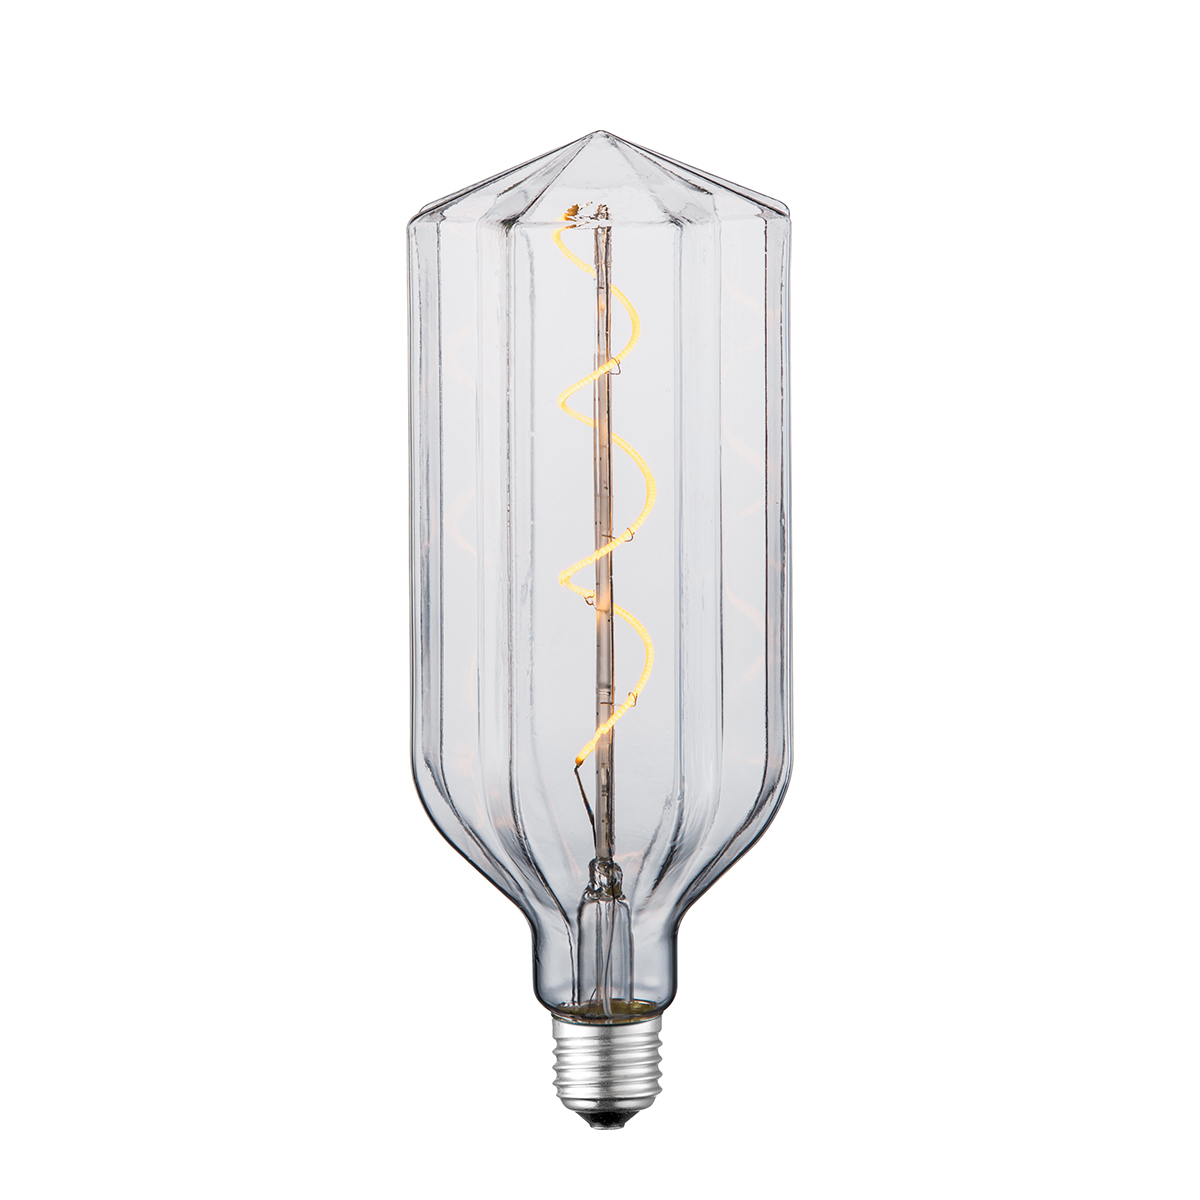 Tangla lighting - TLB-8107-04CL - LED Light Bulb Single Spiral filament - special 4W clear - apex - dimmable - E27